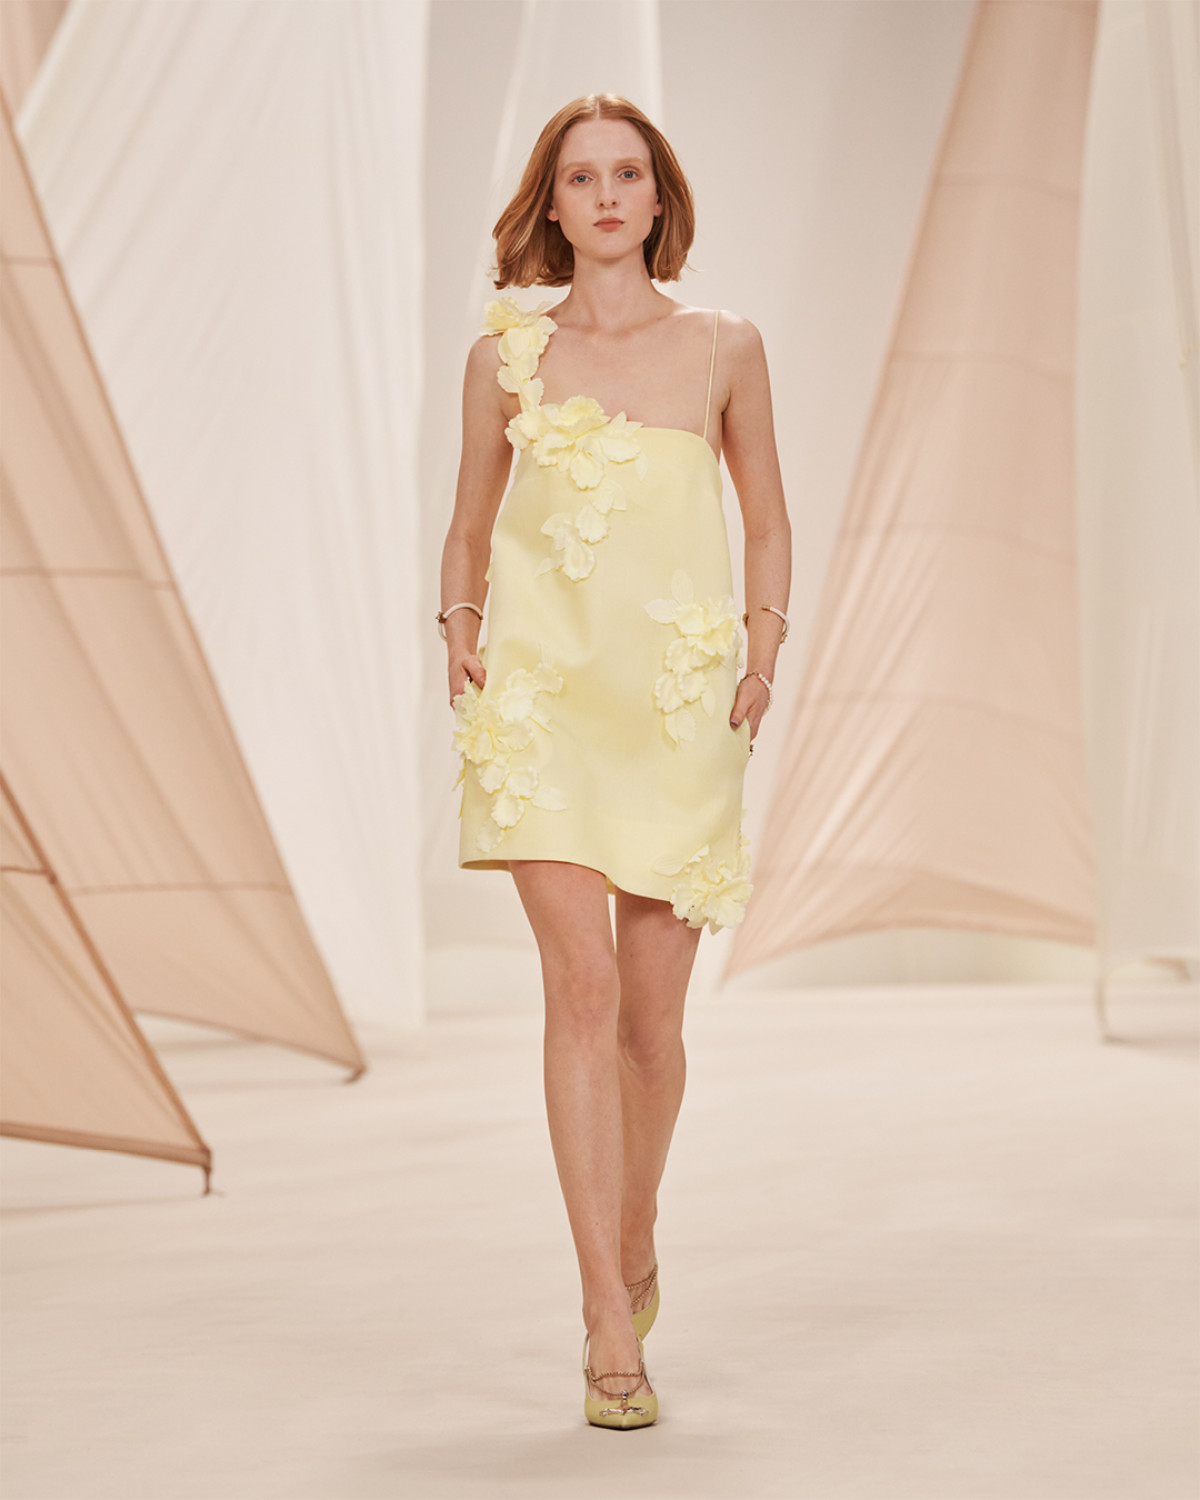 Zimmermann Presents Its New Resort 23 Collection